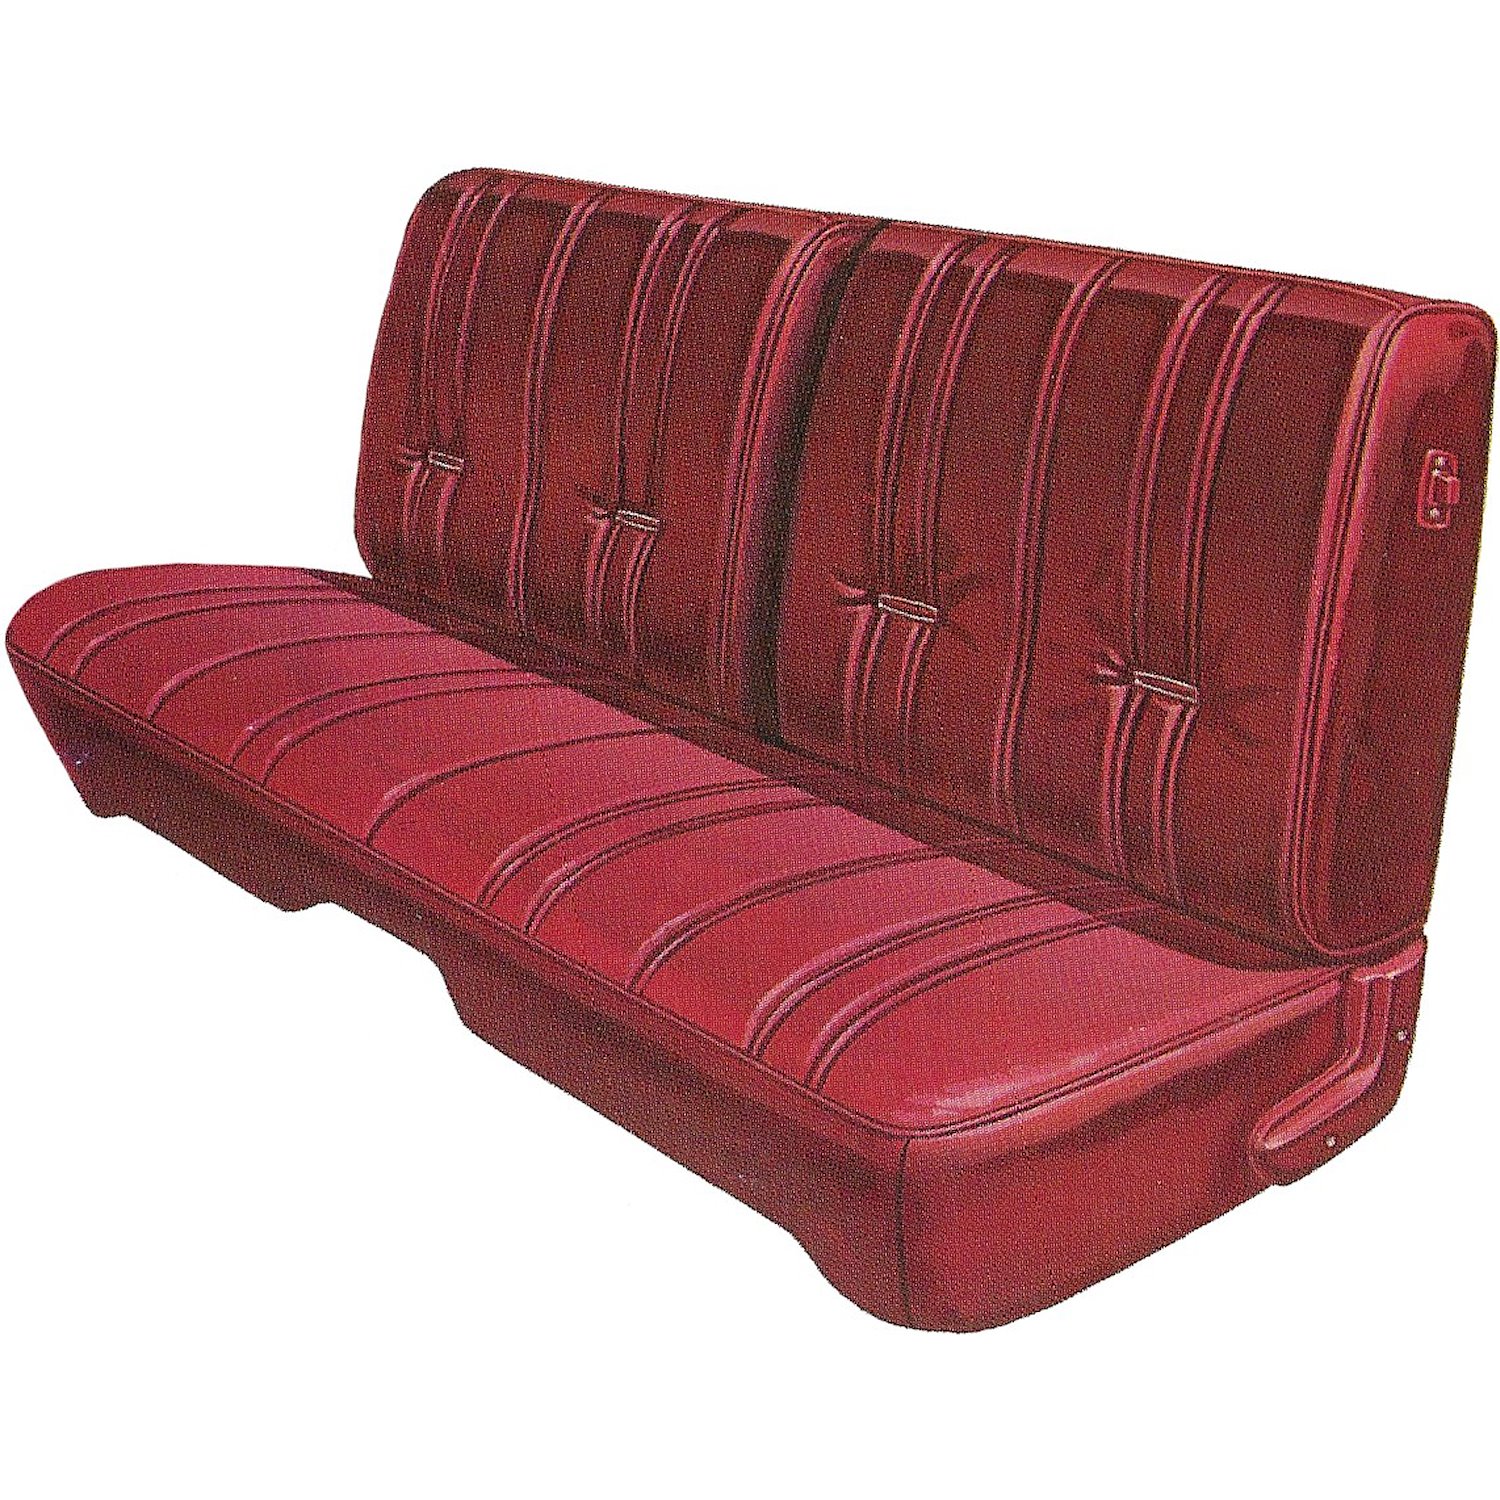 AA79CDT0020548 79 LIL RED EXPRESS STRAIGHT BENCH - RED